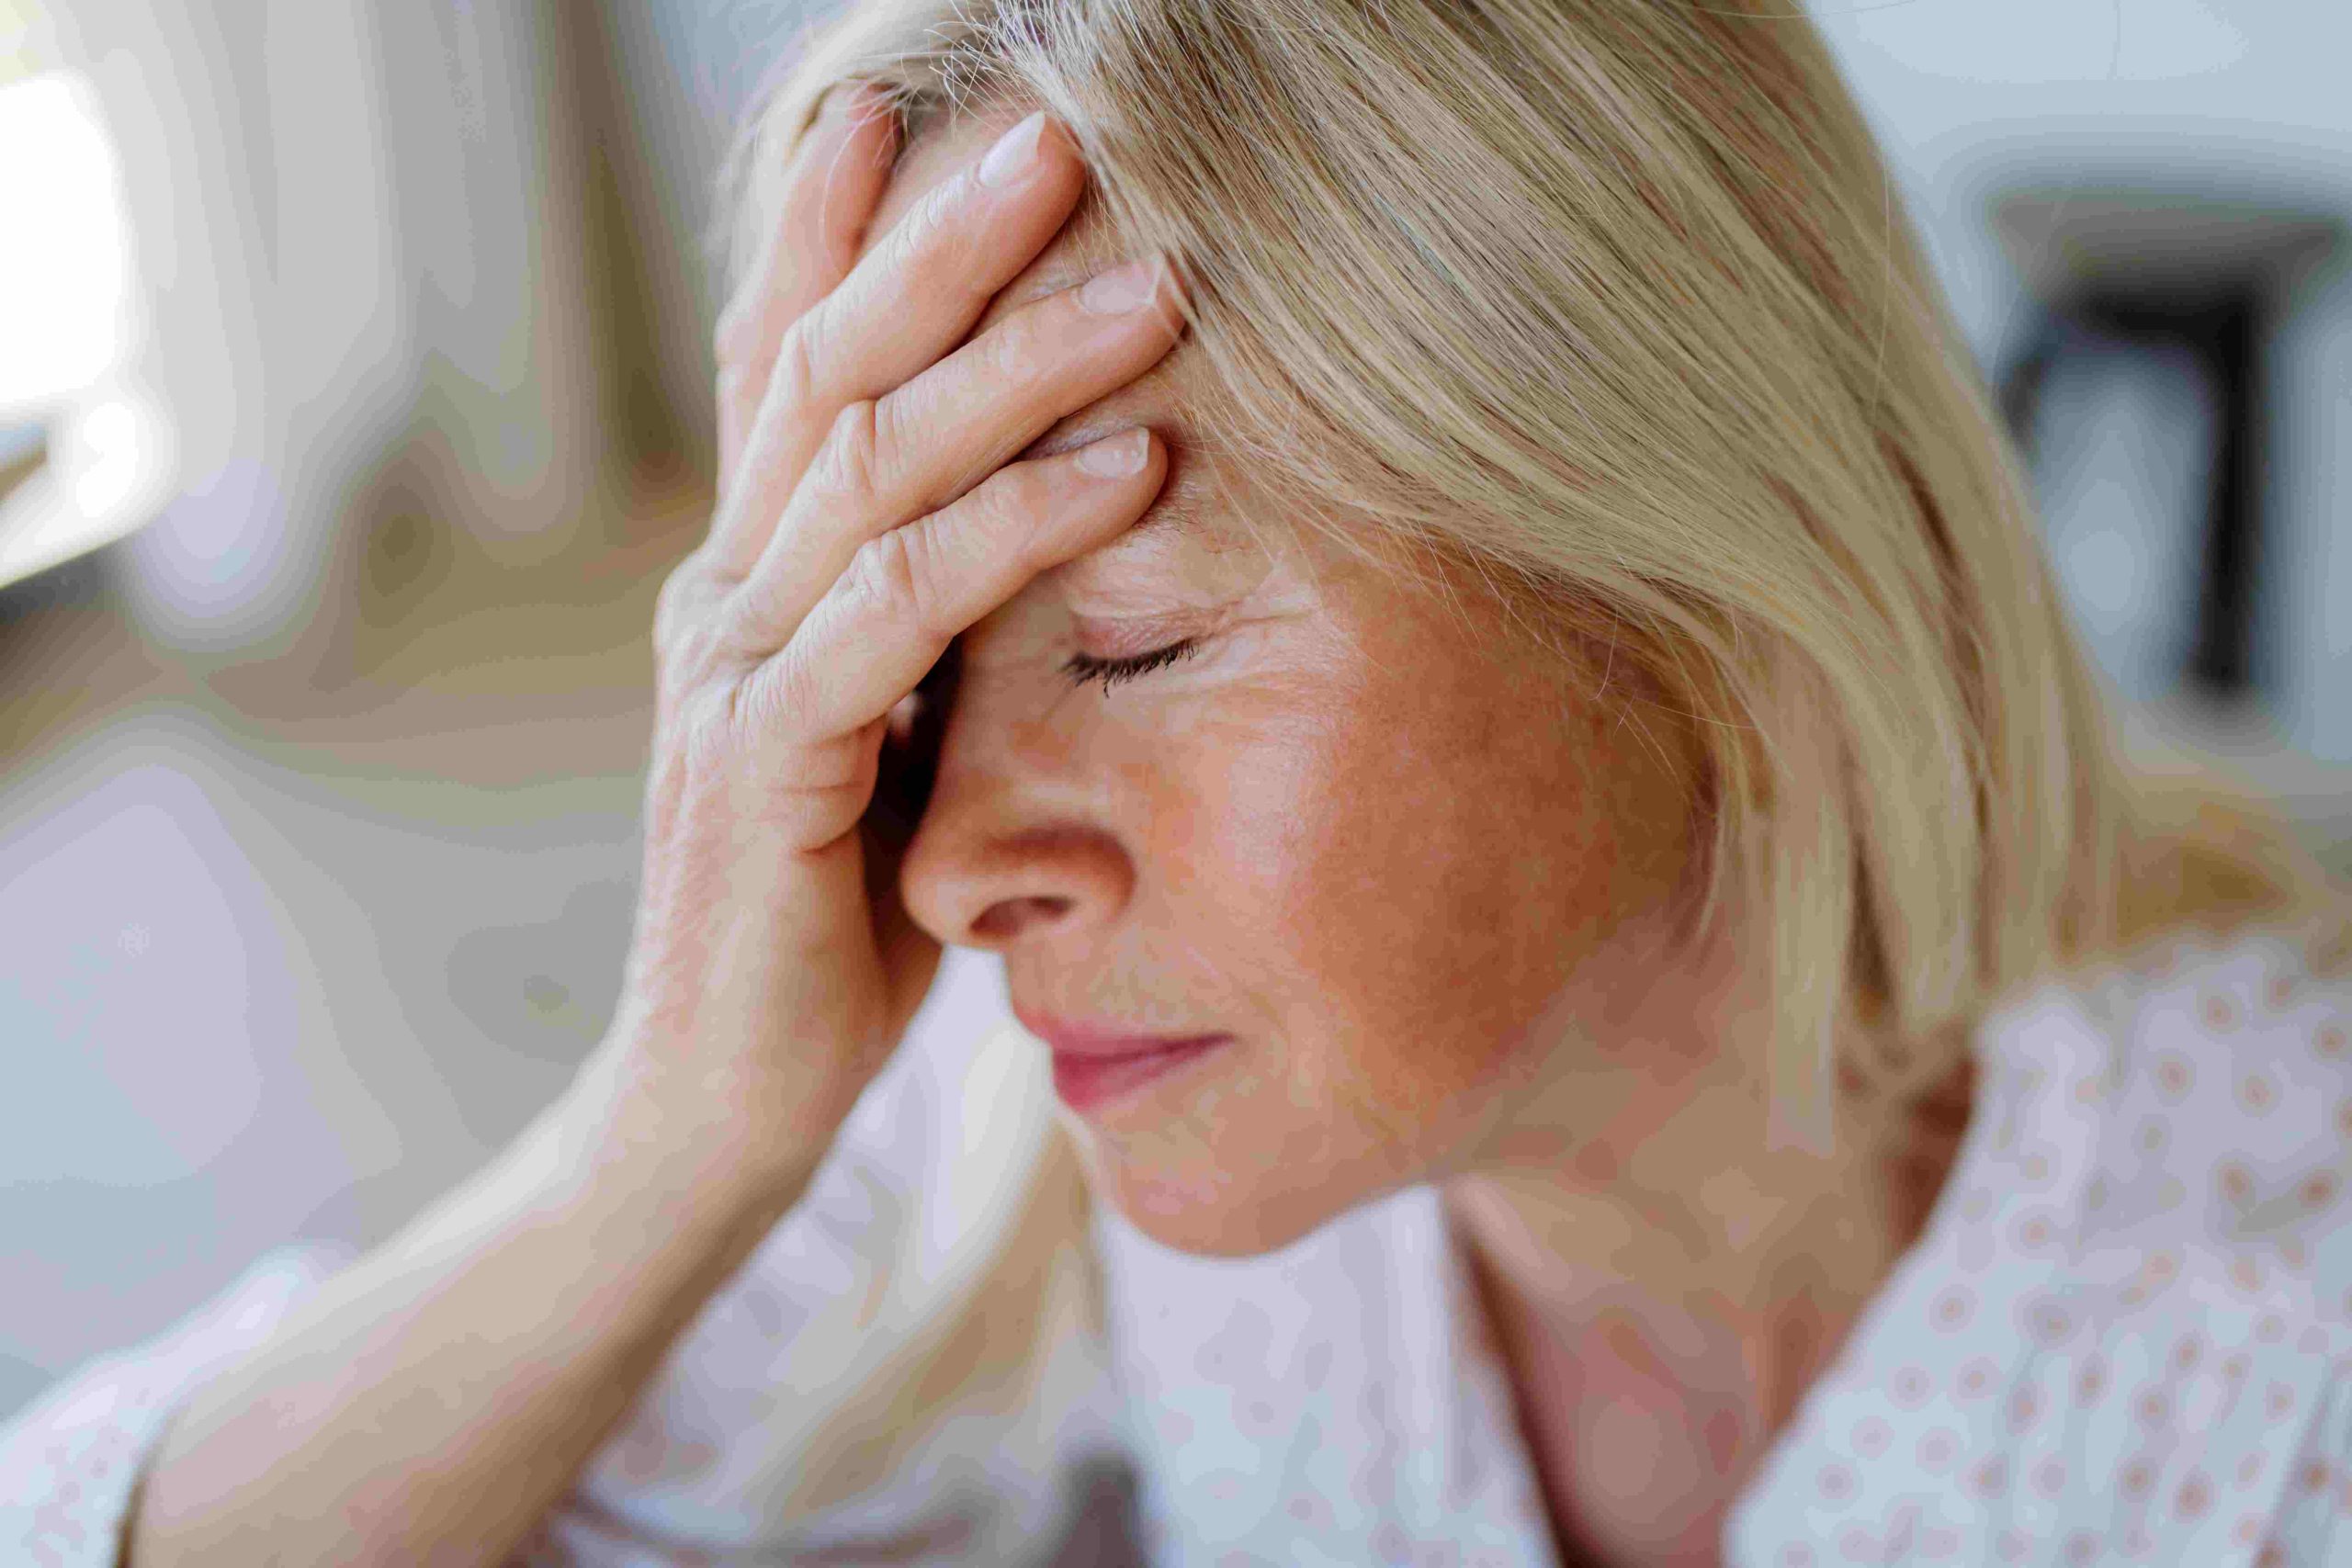 How Seeing a Chiropractor Can Help With Headaches